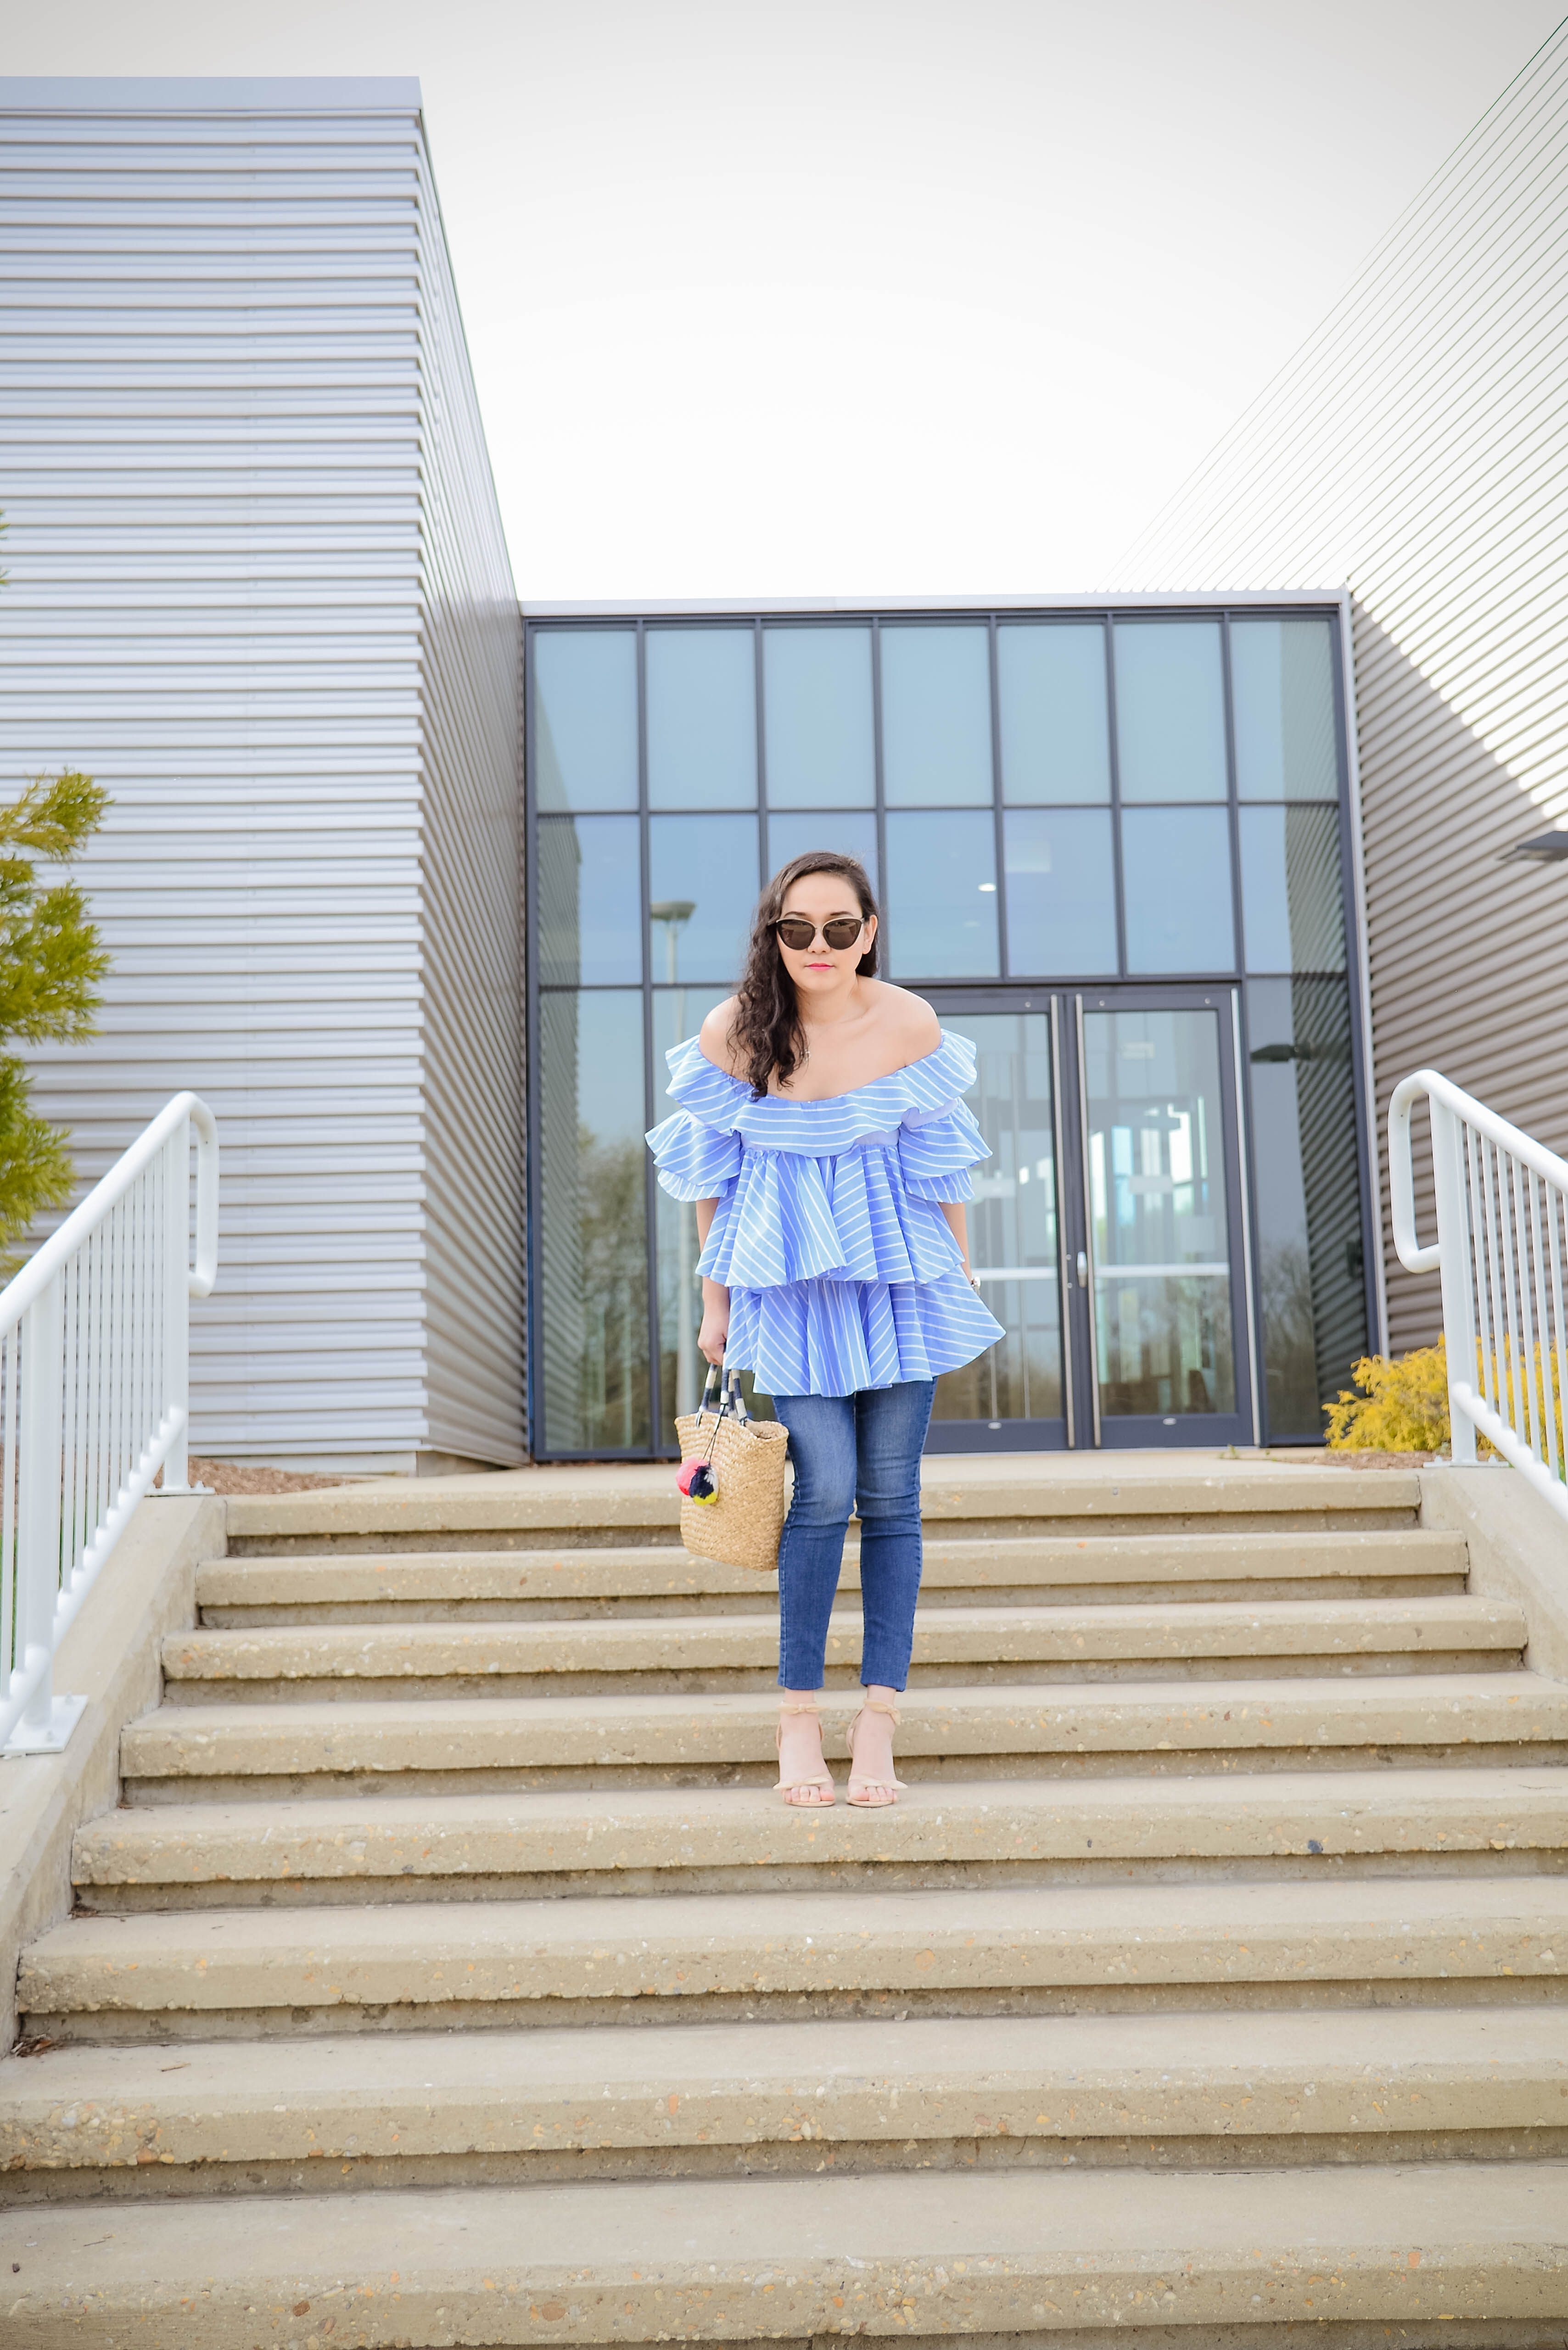 Chic Casual: Tiered Ruffle Striped Top